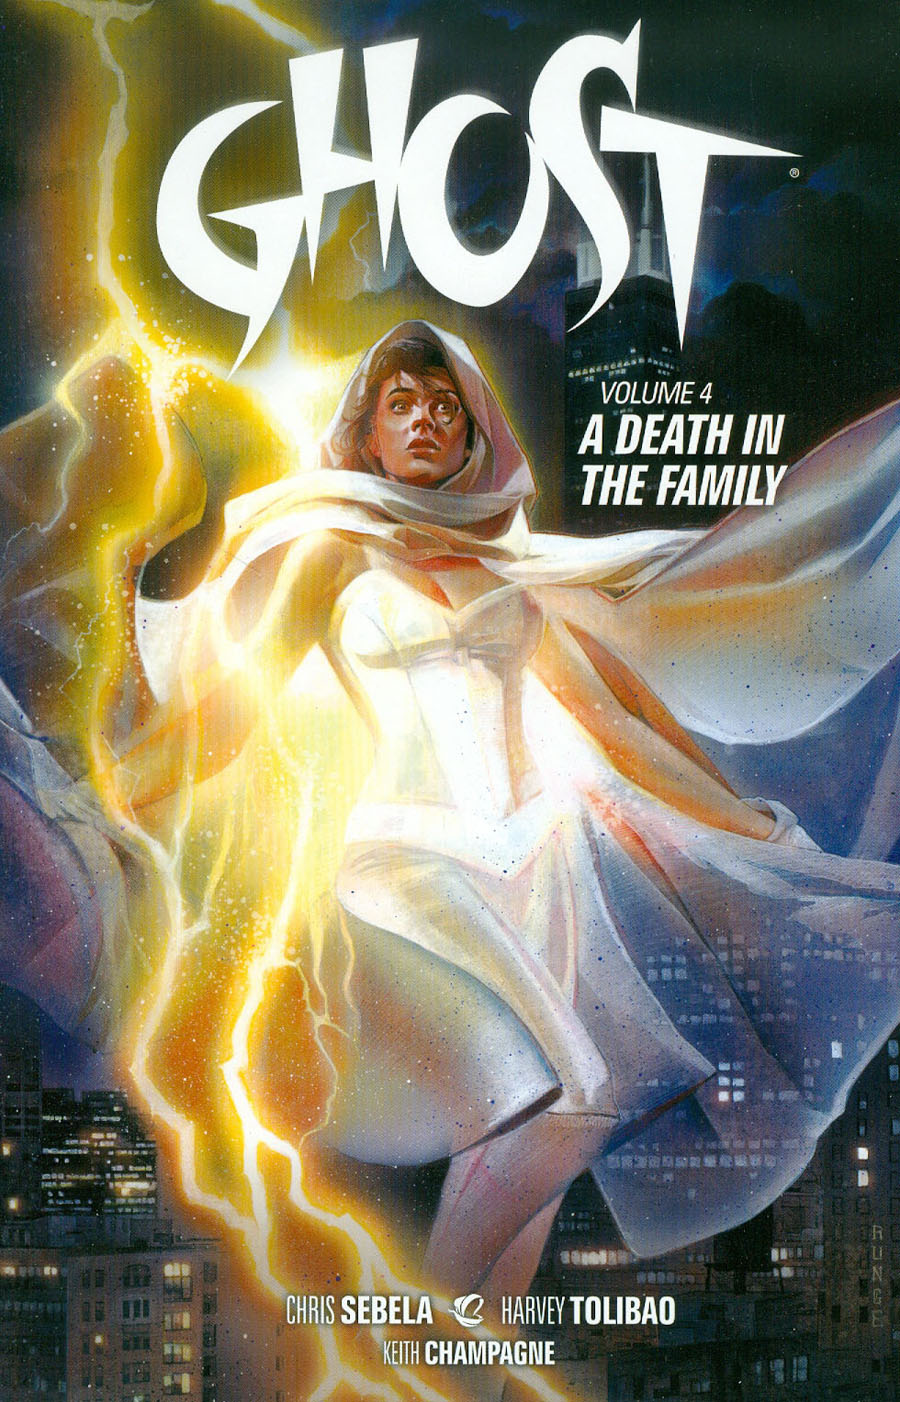 Ghost Vol 4 Death In The Family TP